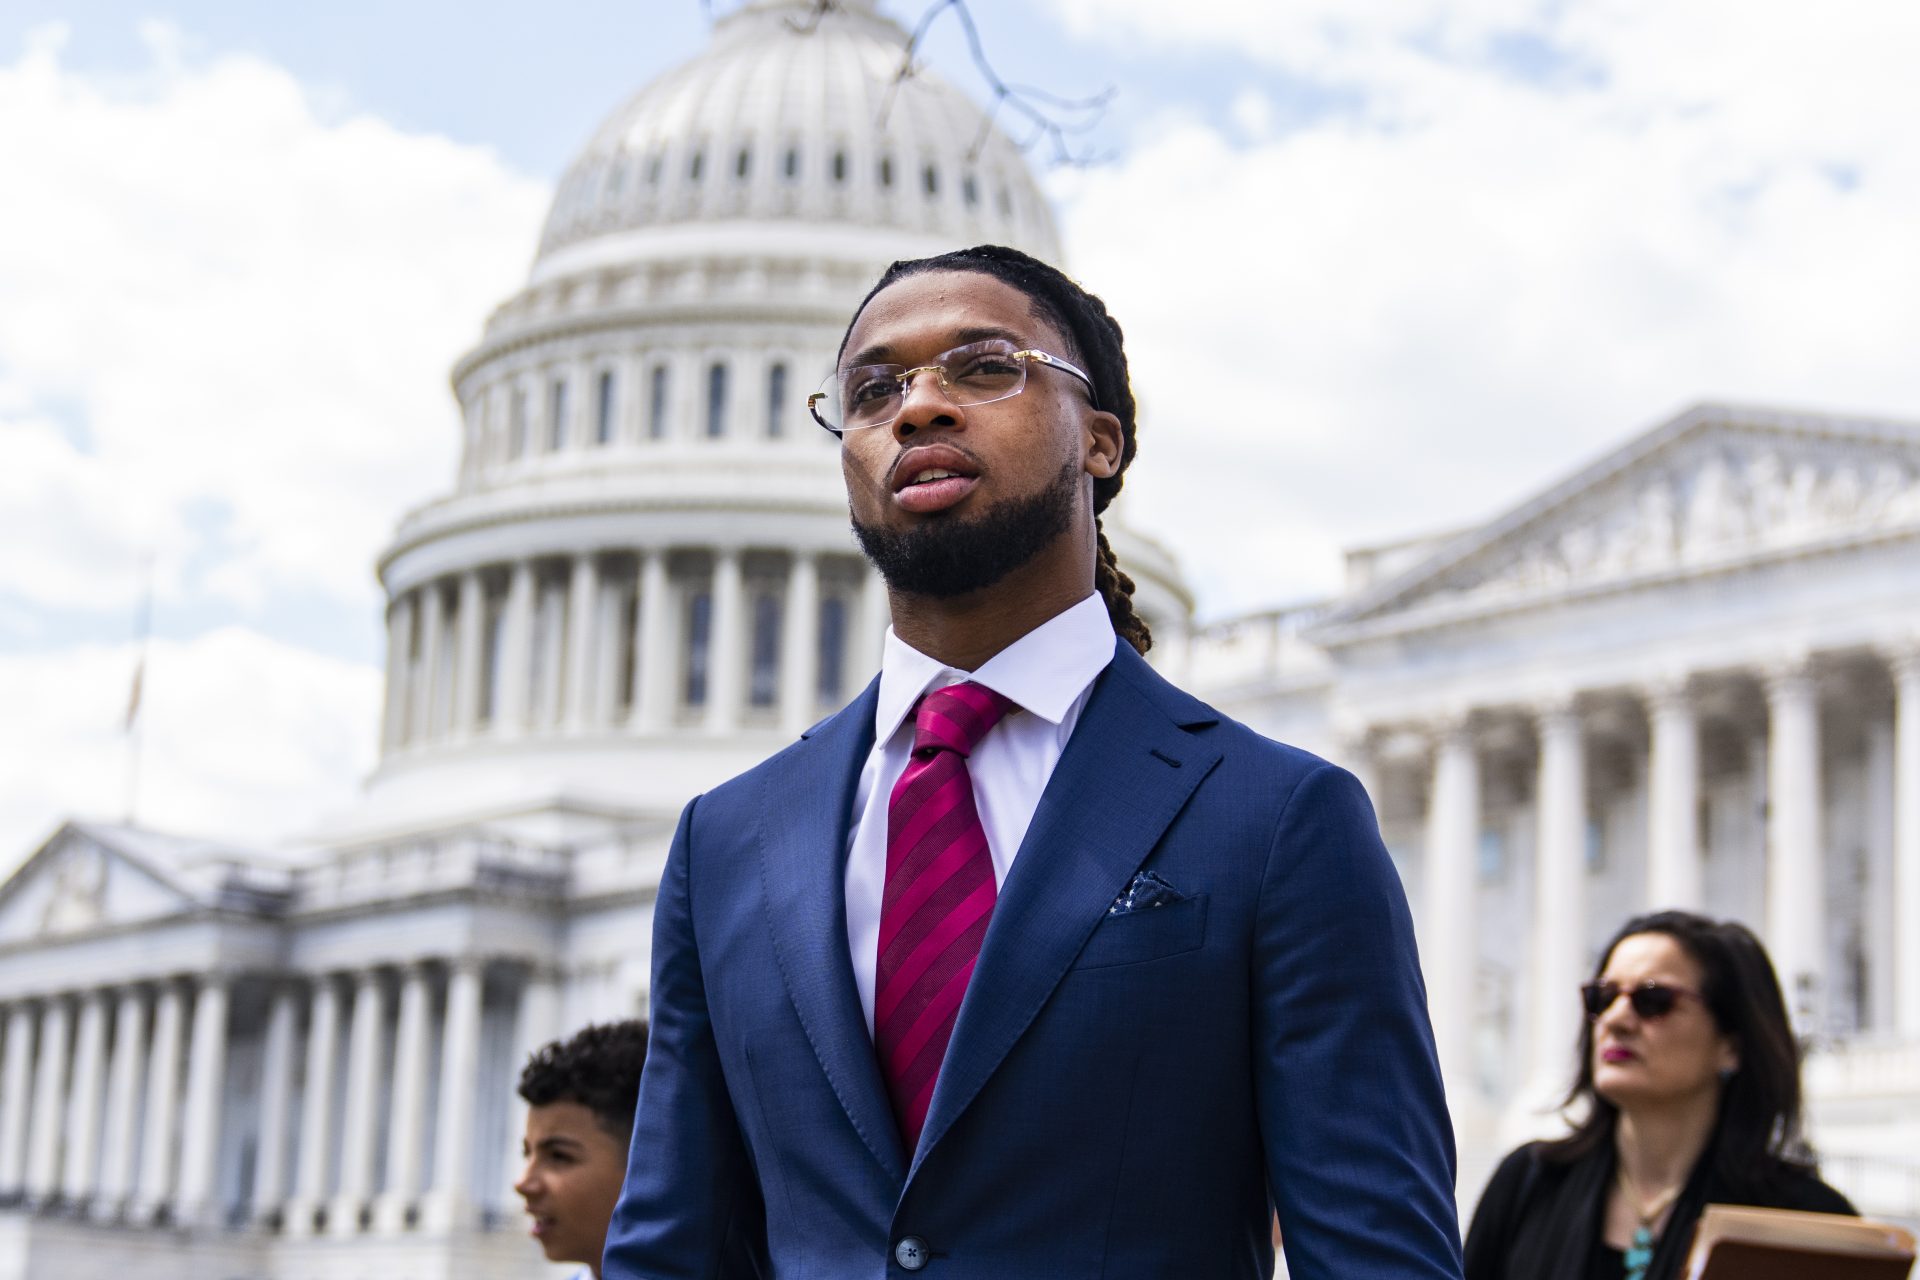 Damar Hamlin Visits Capitol Hill & Urges Lawmakers To Place Life-Saving AEDs, CPR Training In Schools